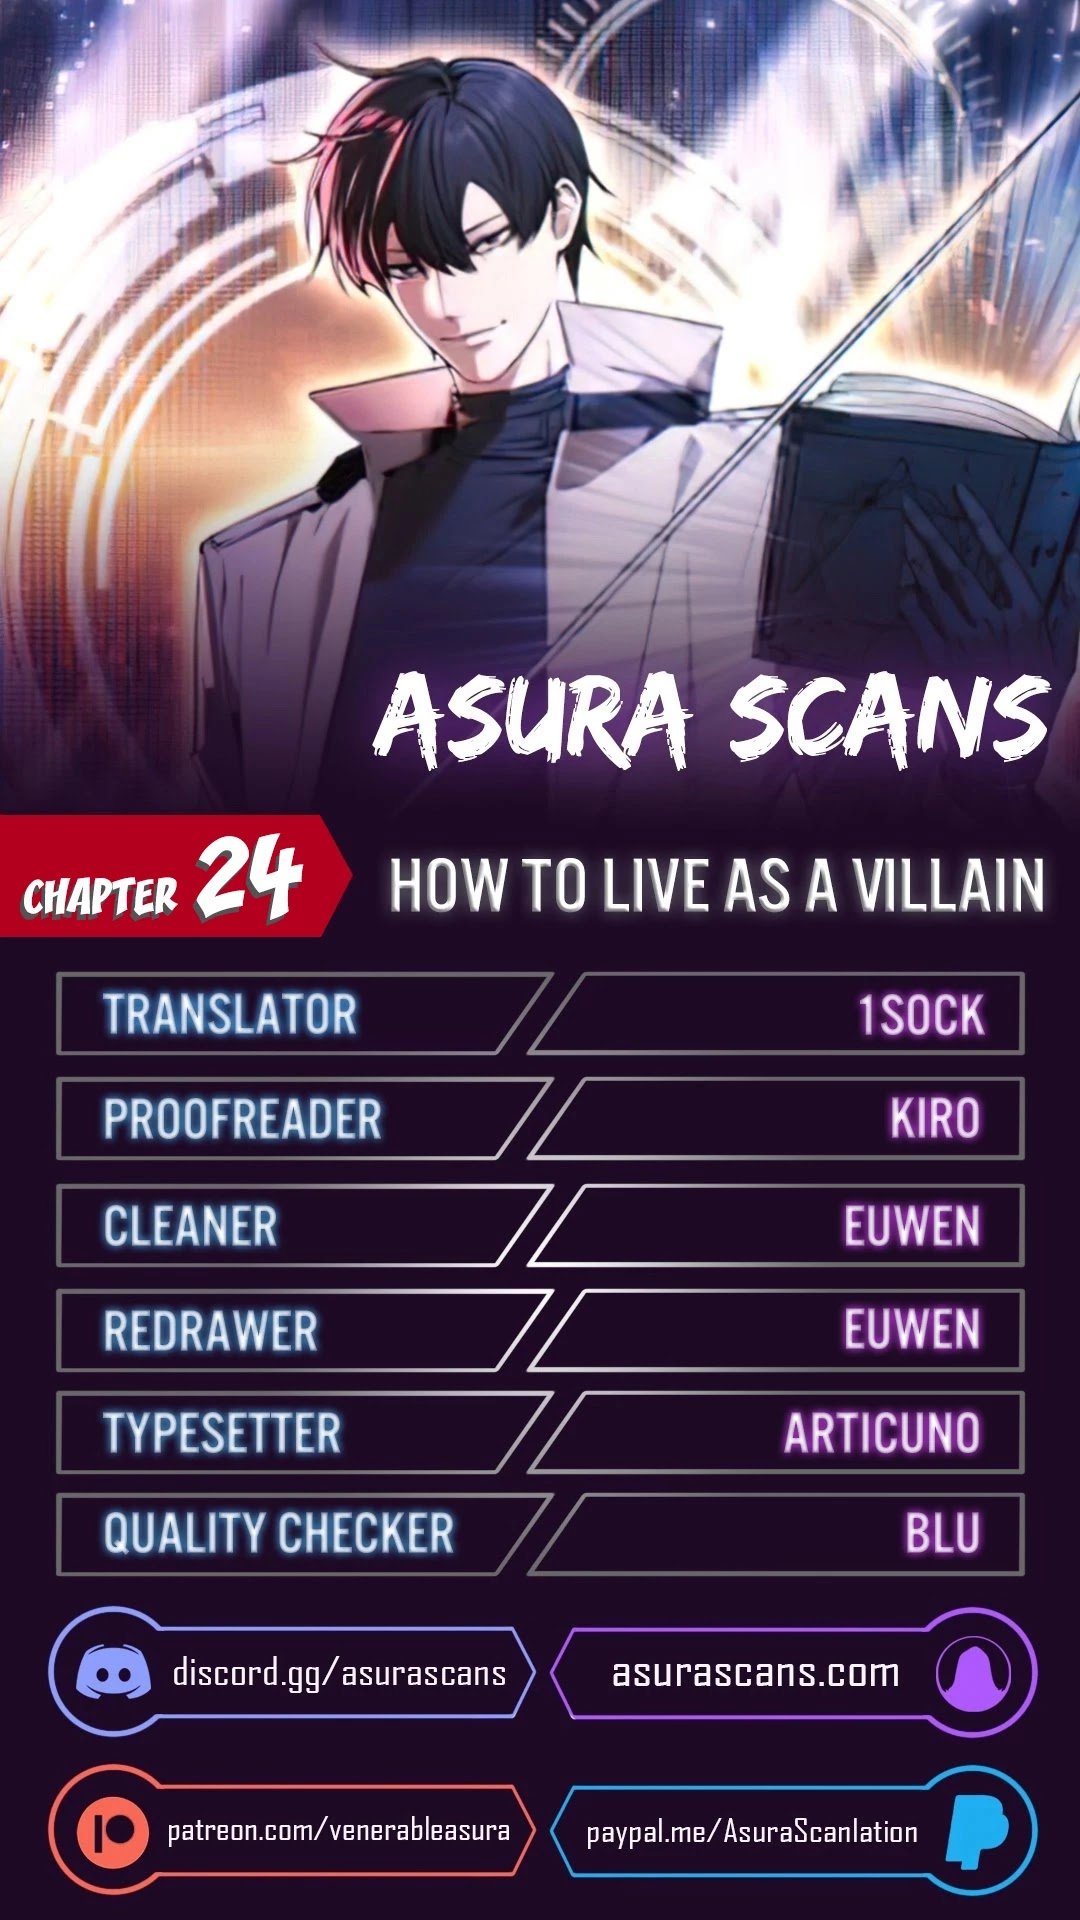 How to Live as a Villain chapter 24